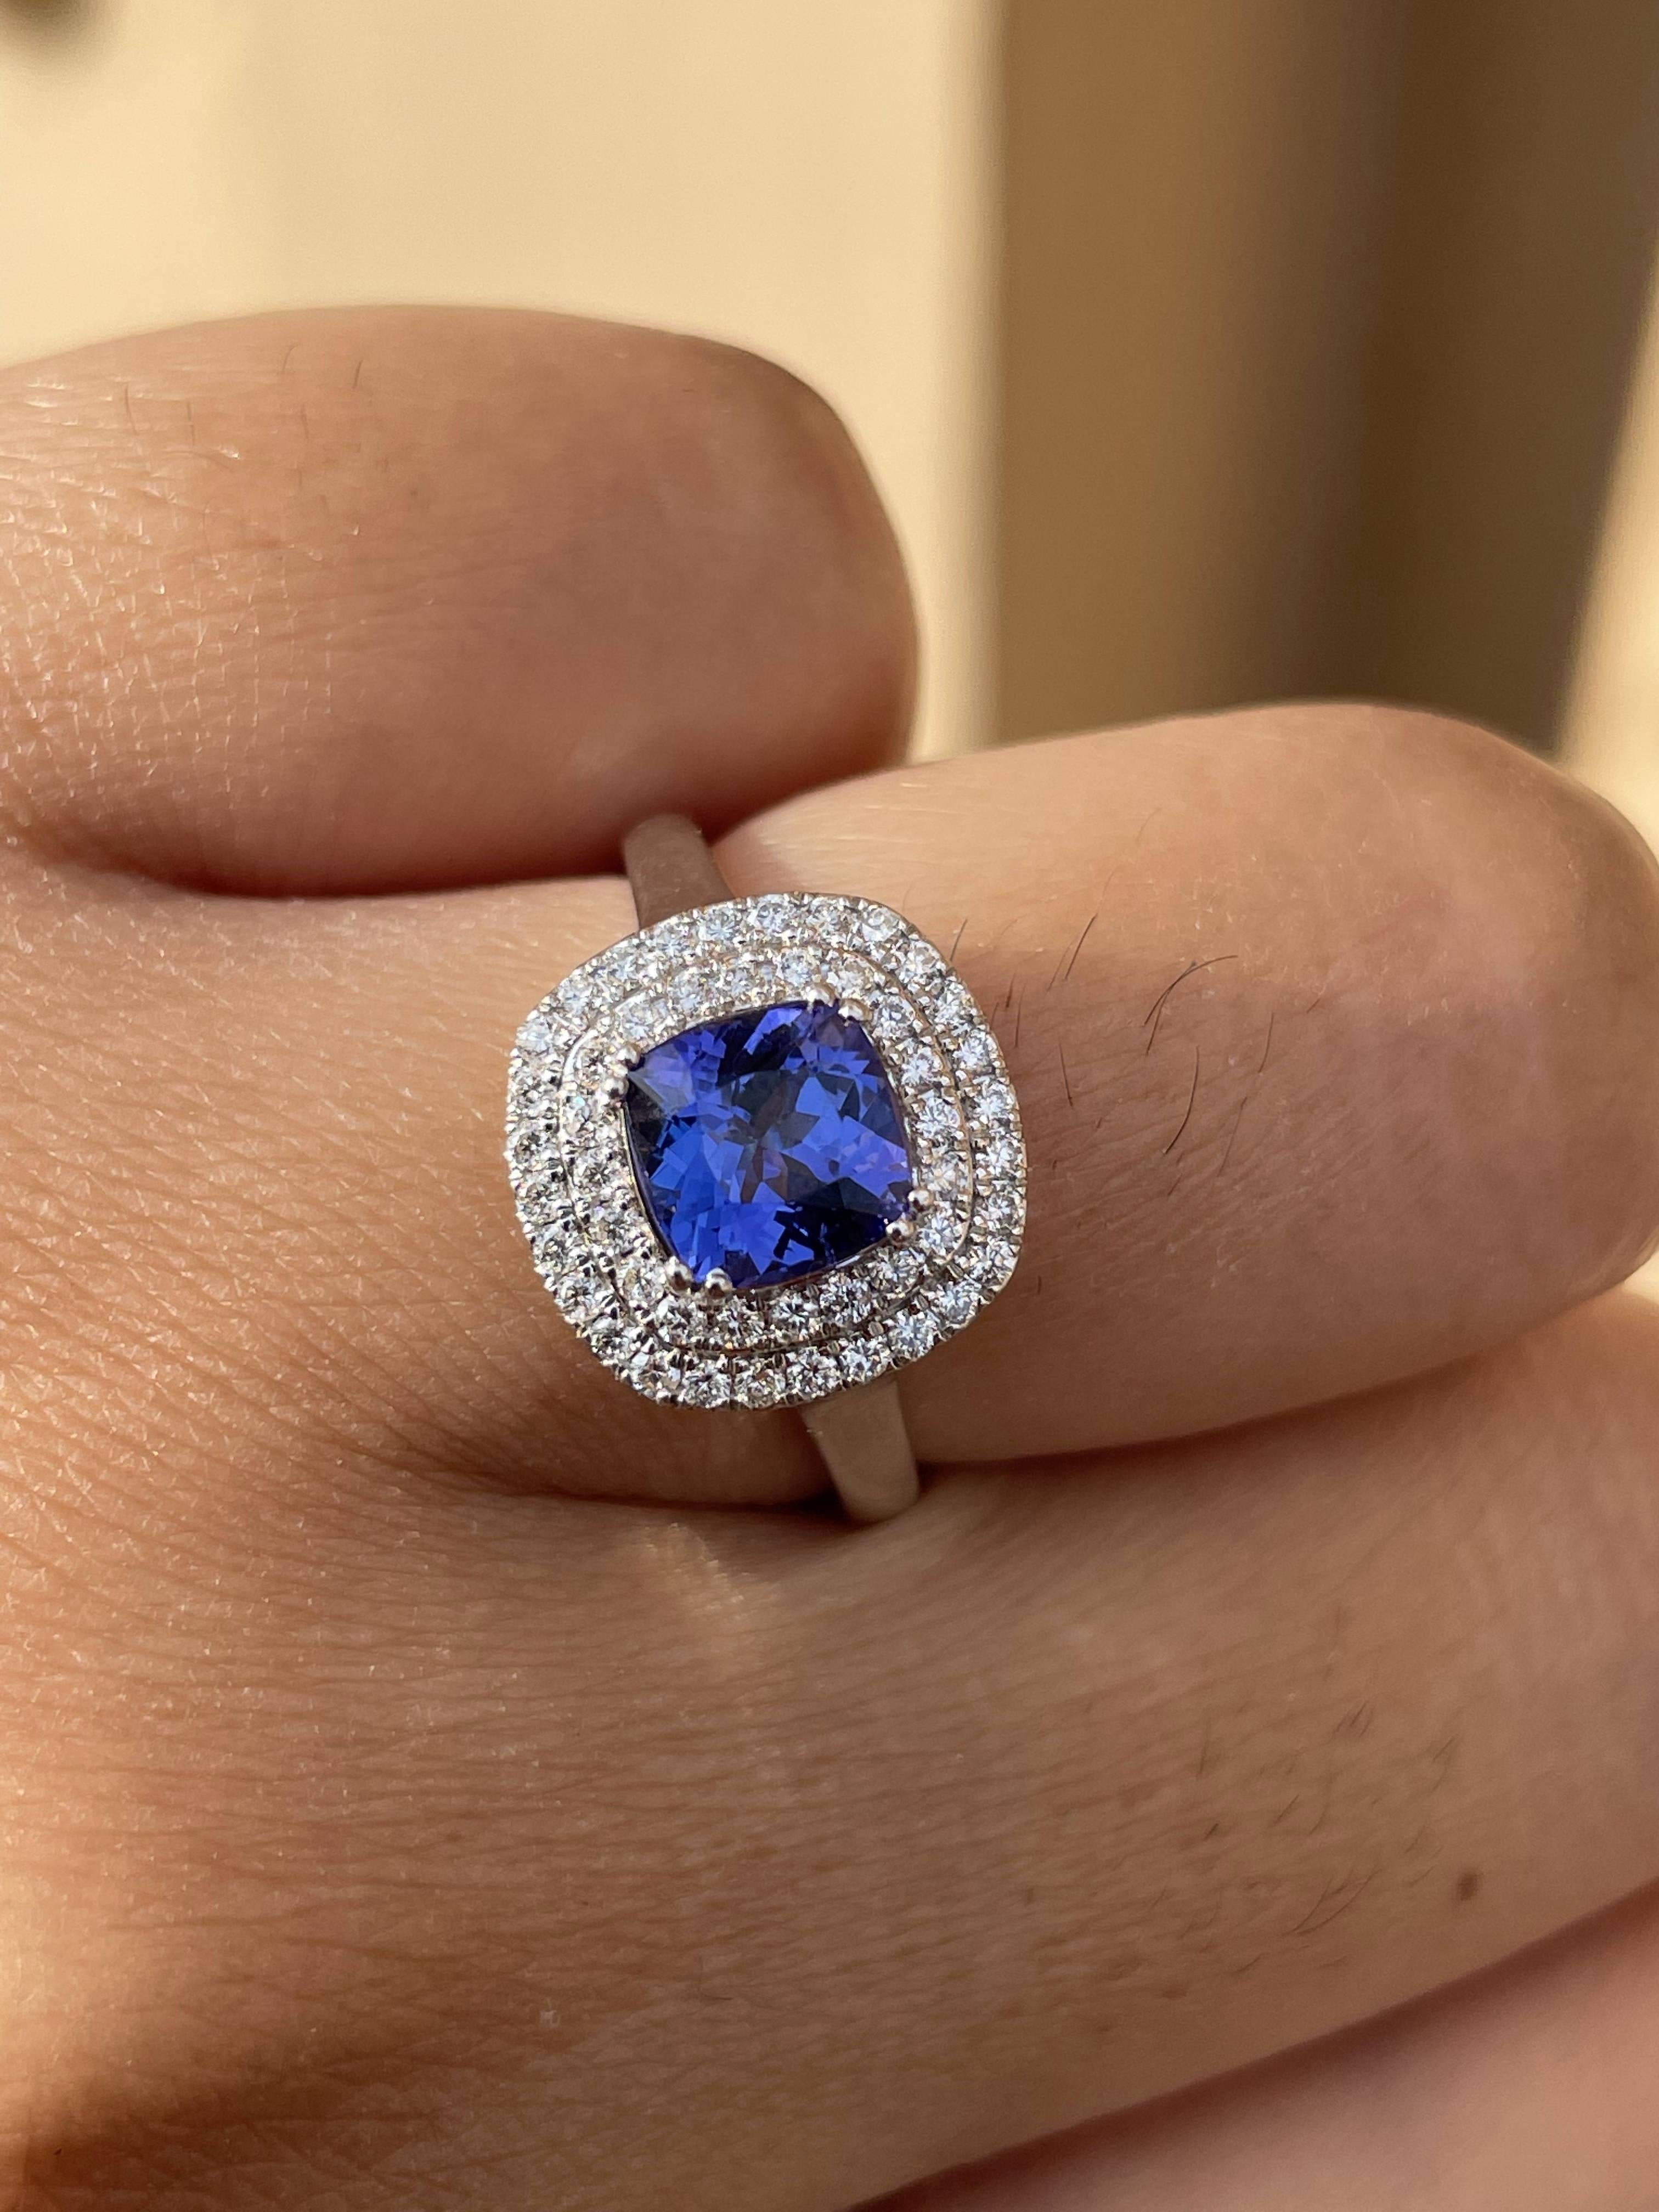 For Sale:  18k Solid White Gold Cushion Cut 1.2 Ct Tanzanite Diamond Ring for Women 10